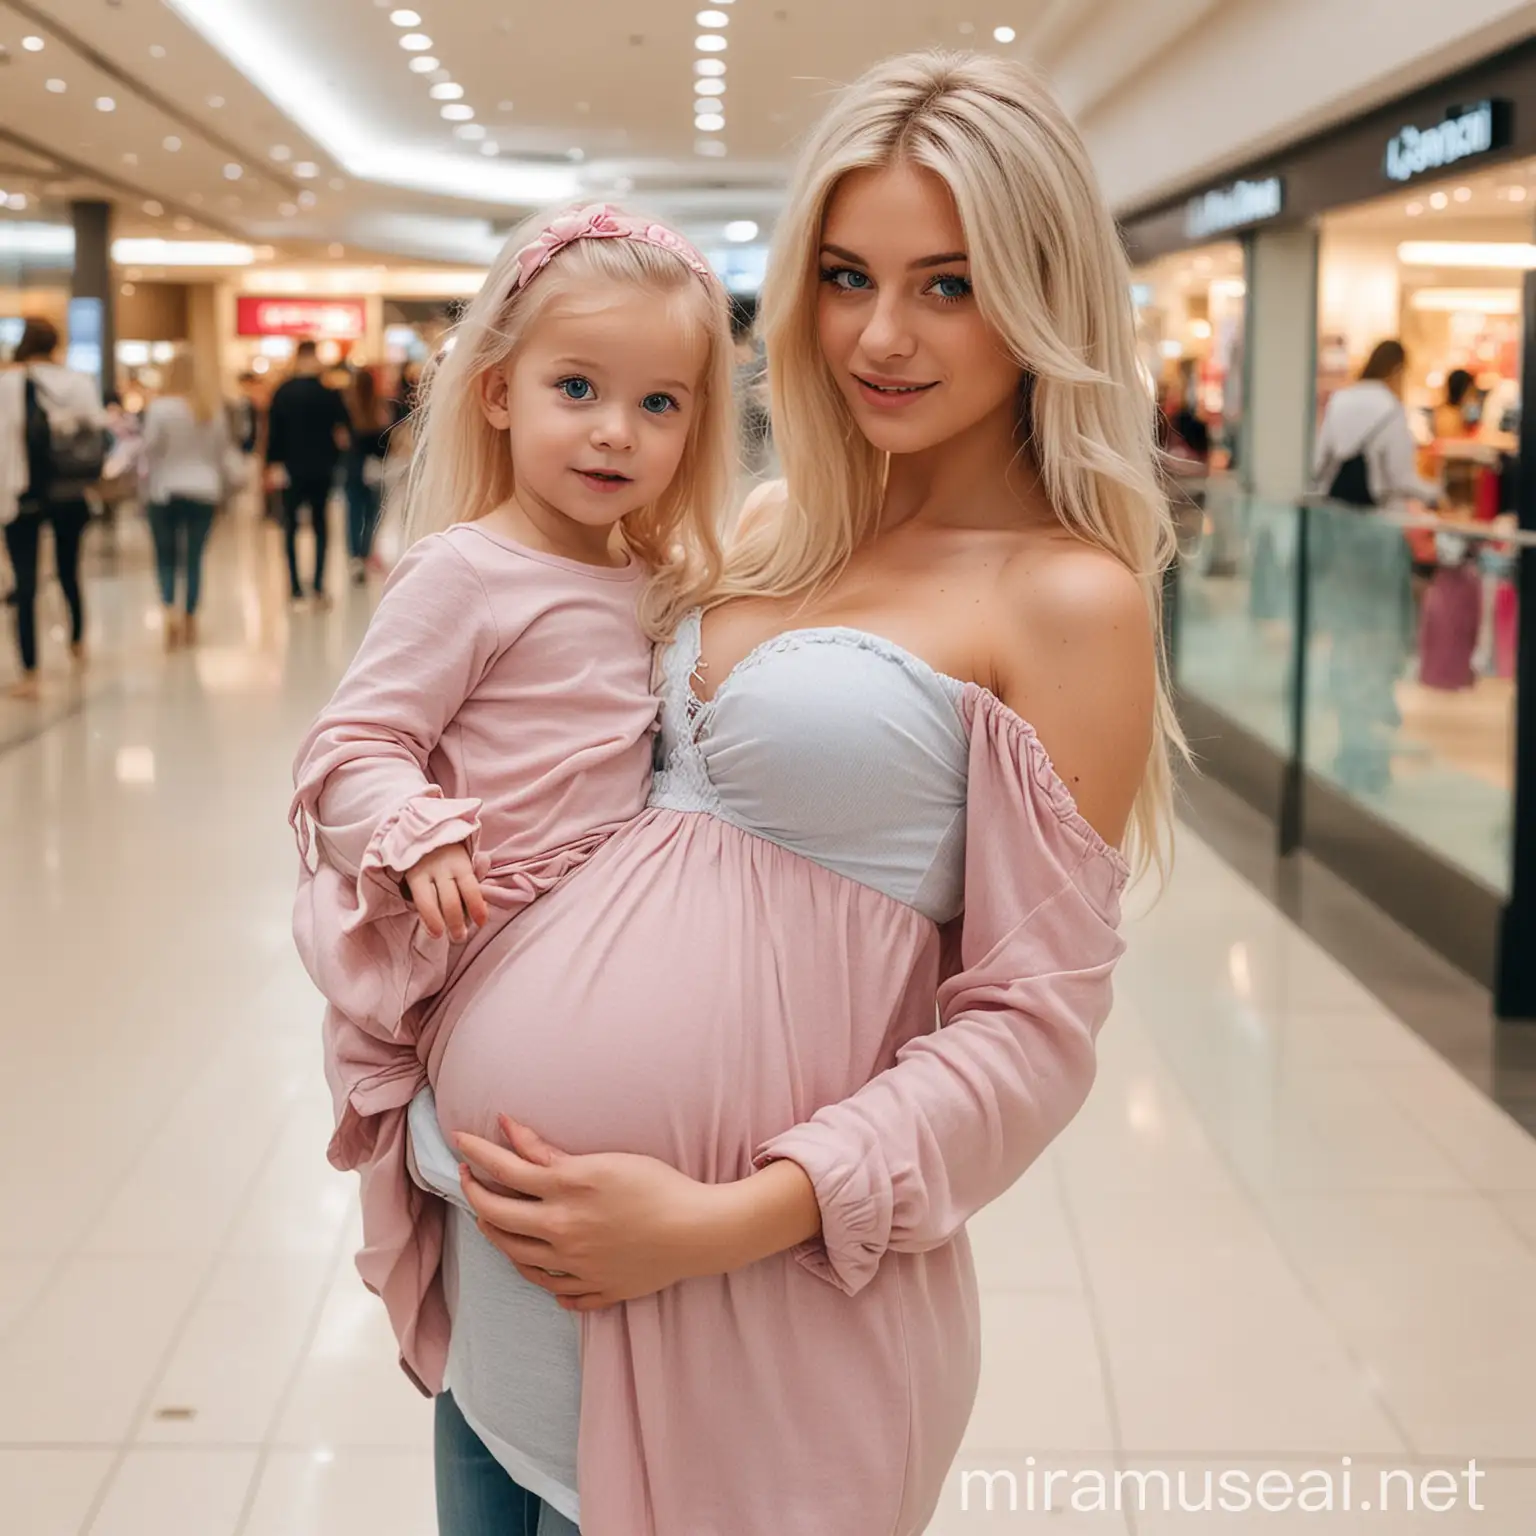 Take a picture of a sexy woman with her little girl. The woman has blonde and pink hair and blue eyes. The girl has light brown and blond hair and blue eyes.The woman is pregnant and they go shopping in a huge modern mall 